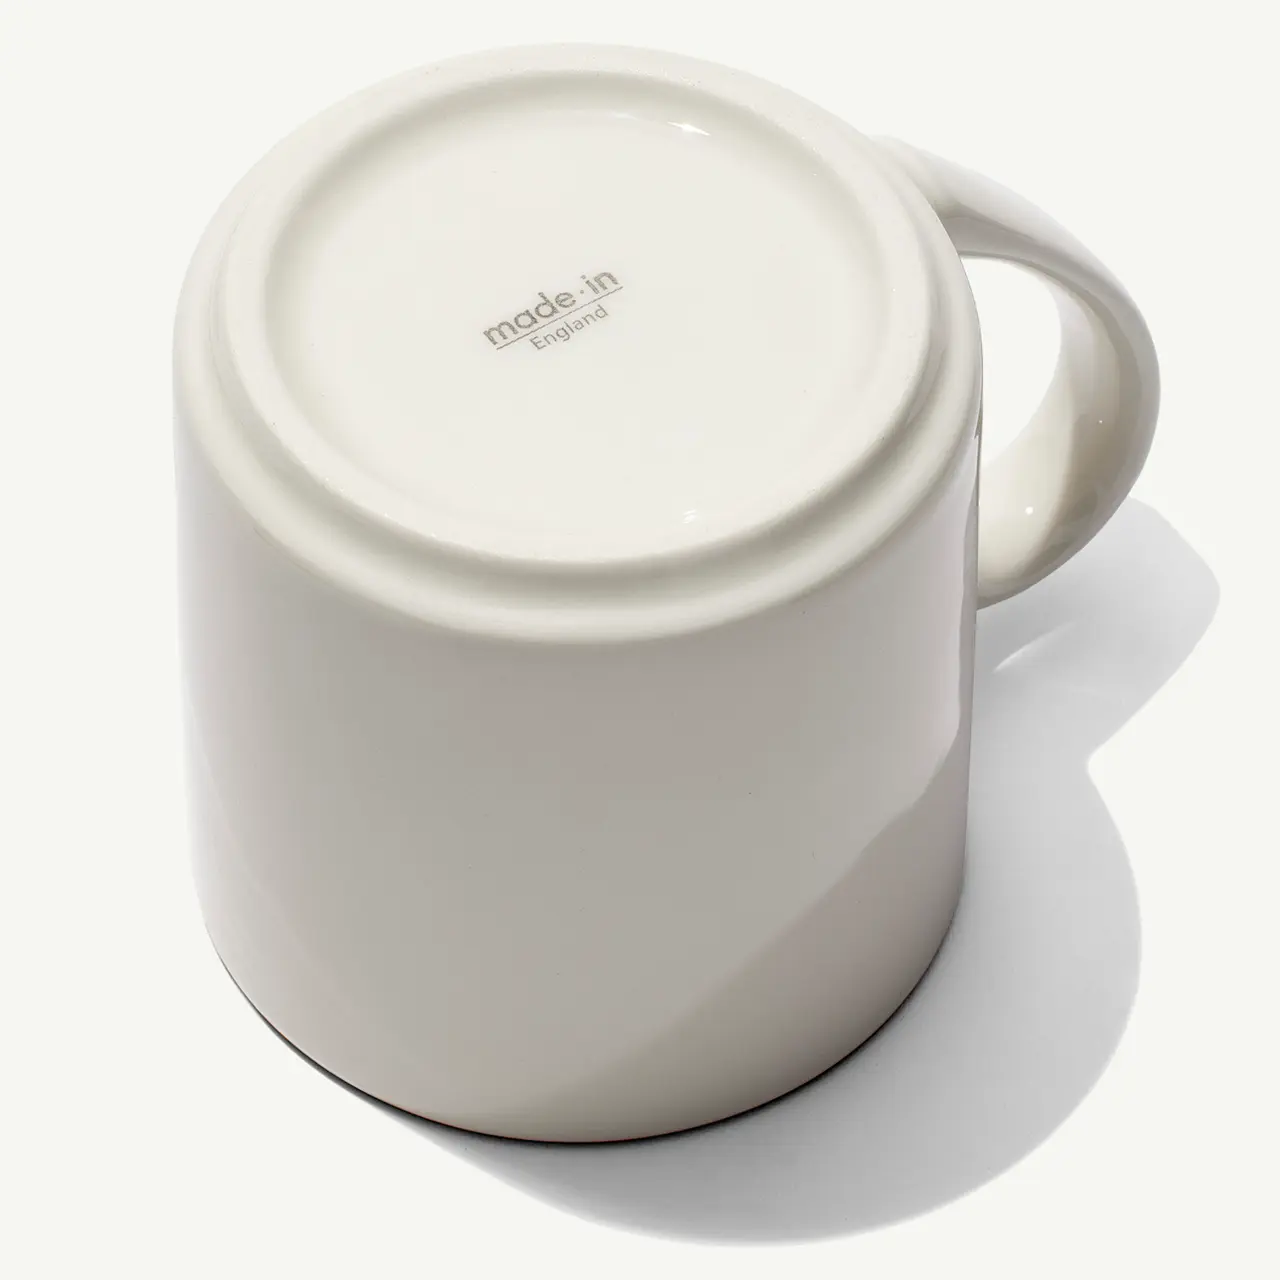 A white ceramic mug is positioned upside down on a white surface, with its handle to the left and text on the bottom indicating its brand or manufacturing origin.